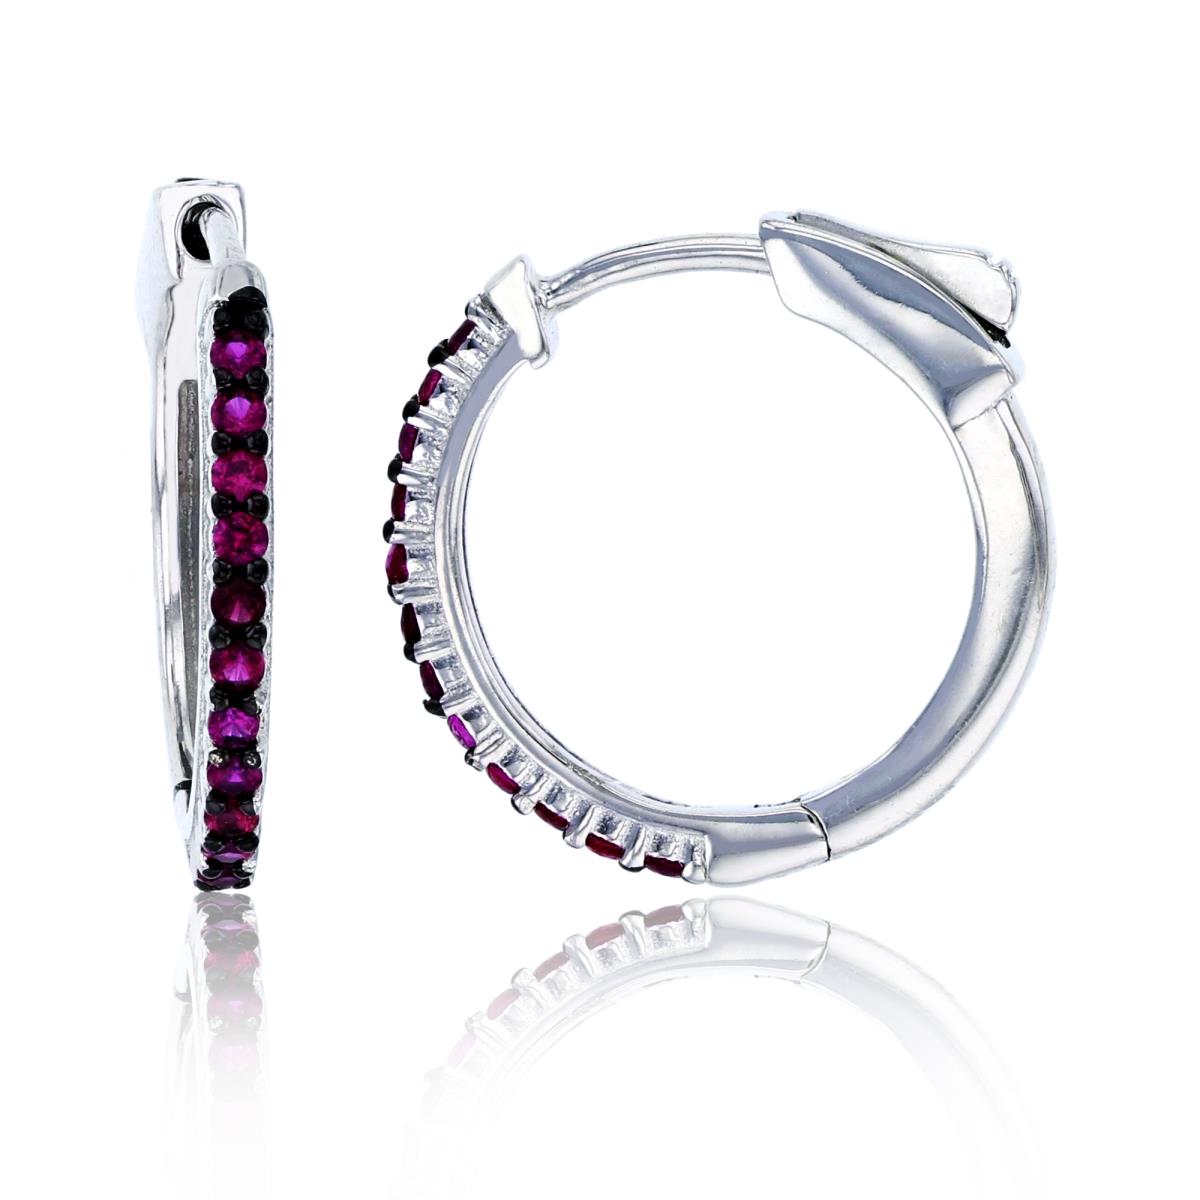 Sterling Silver Black & White 20x2mm One-Row Pave Ruby Hoop Earring with Safety Lock